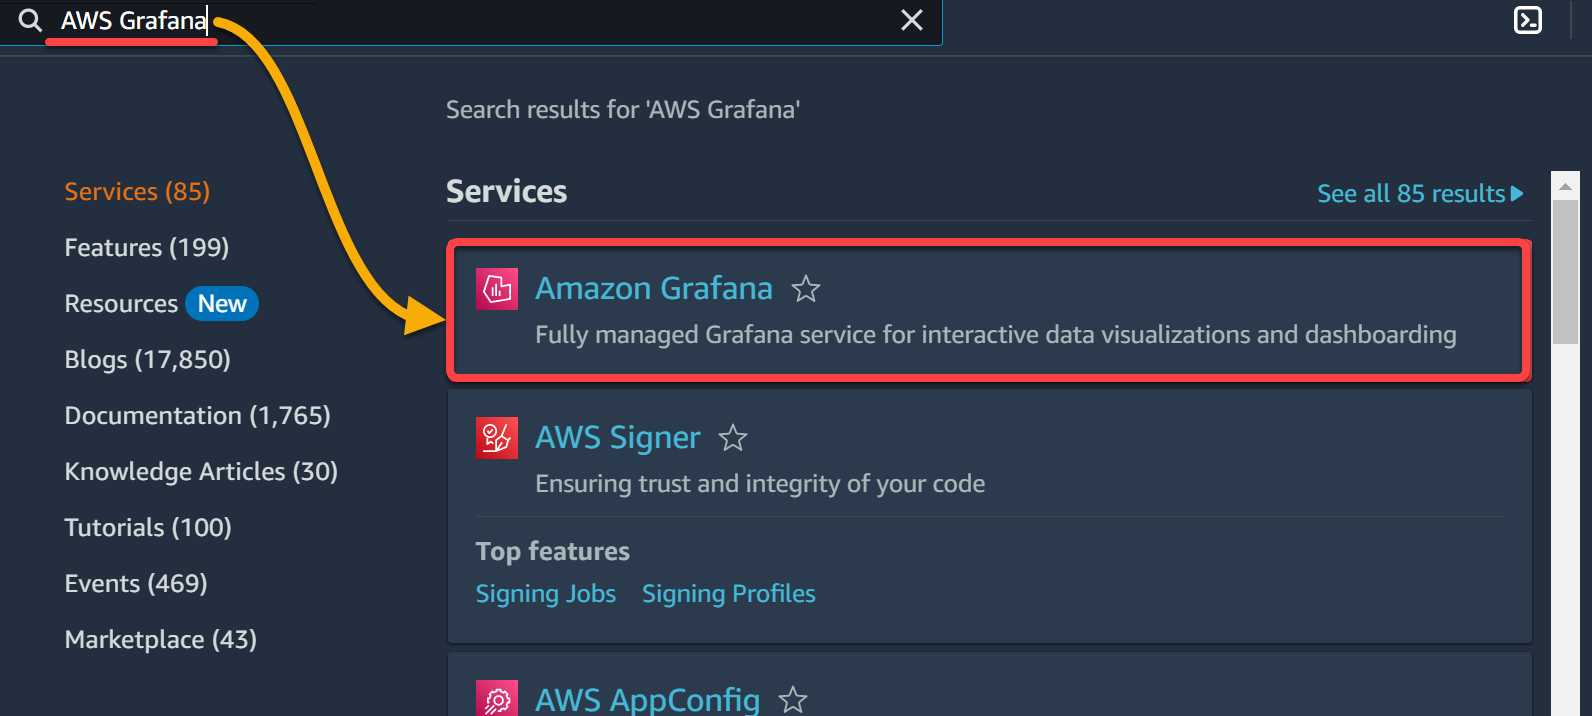 Searching for the AWS Grafana service